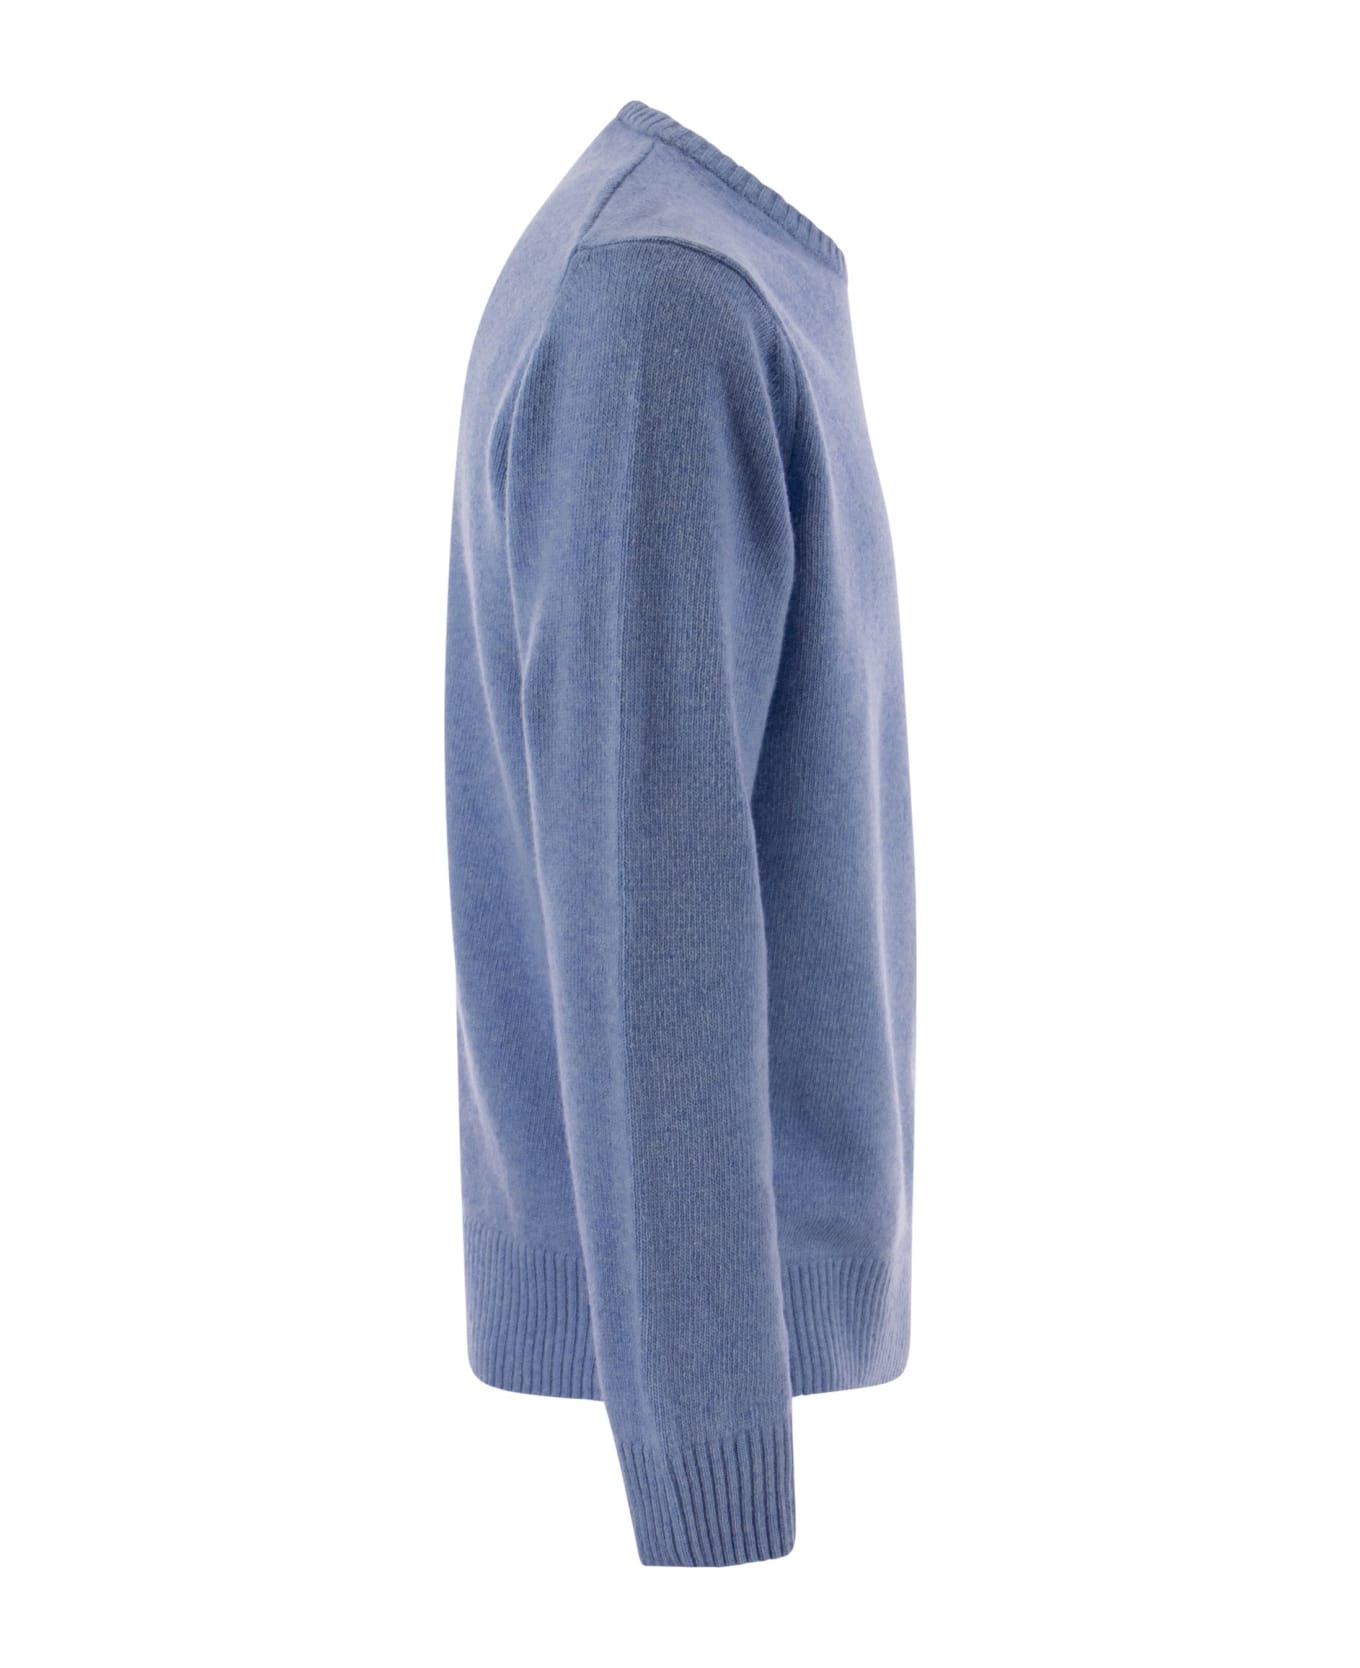 Paul&Shark Wool Crew Neck With Arm Patch - Light Blue